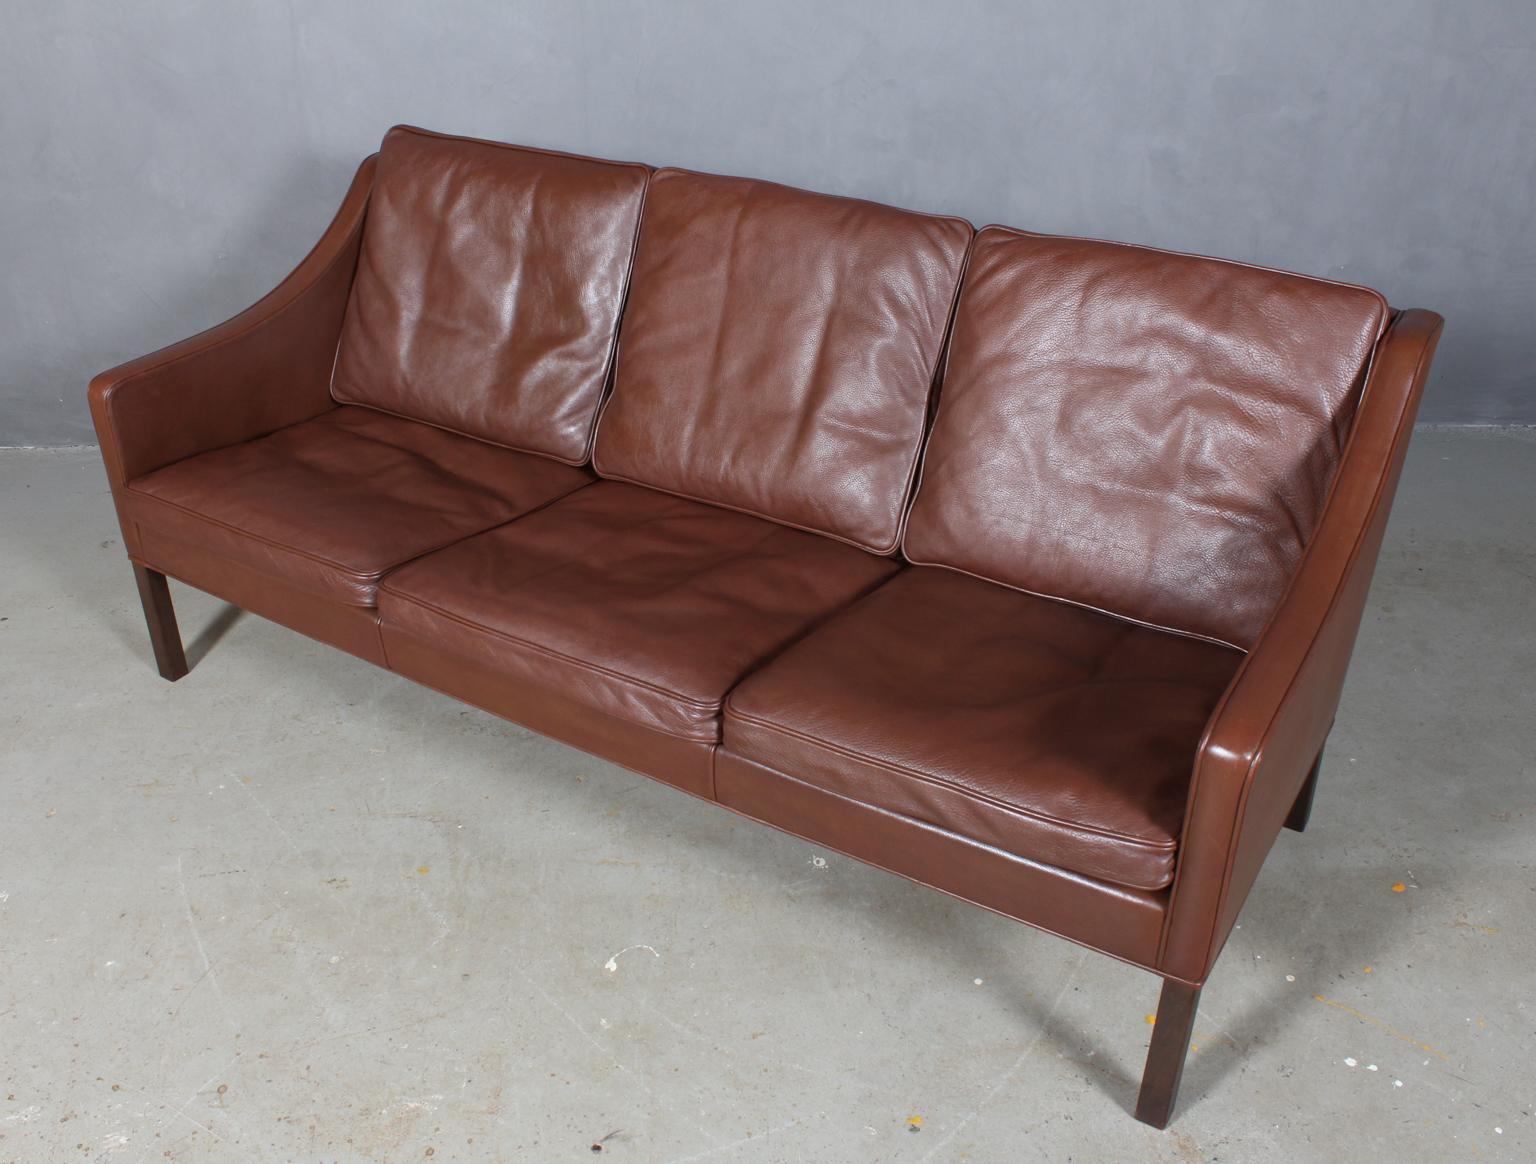 Børge Mogensen three-seat sofa original upholstered in brown leather.

Legs of smoked oak.

Model 2209, made by Fredericia Furniture.